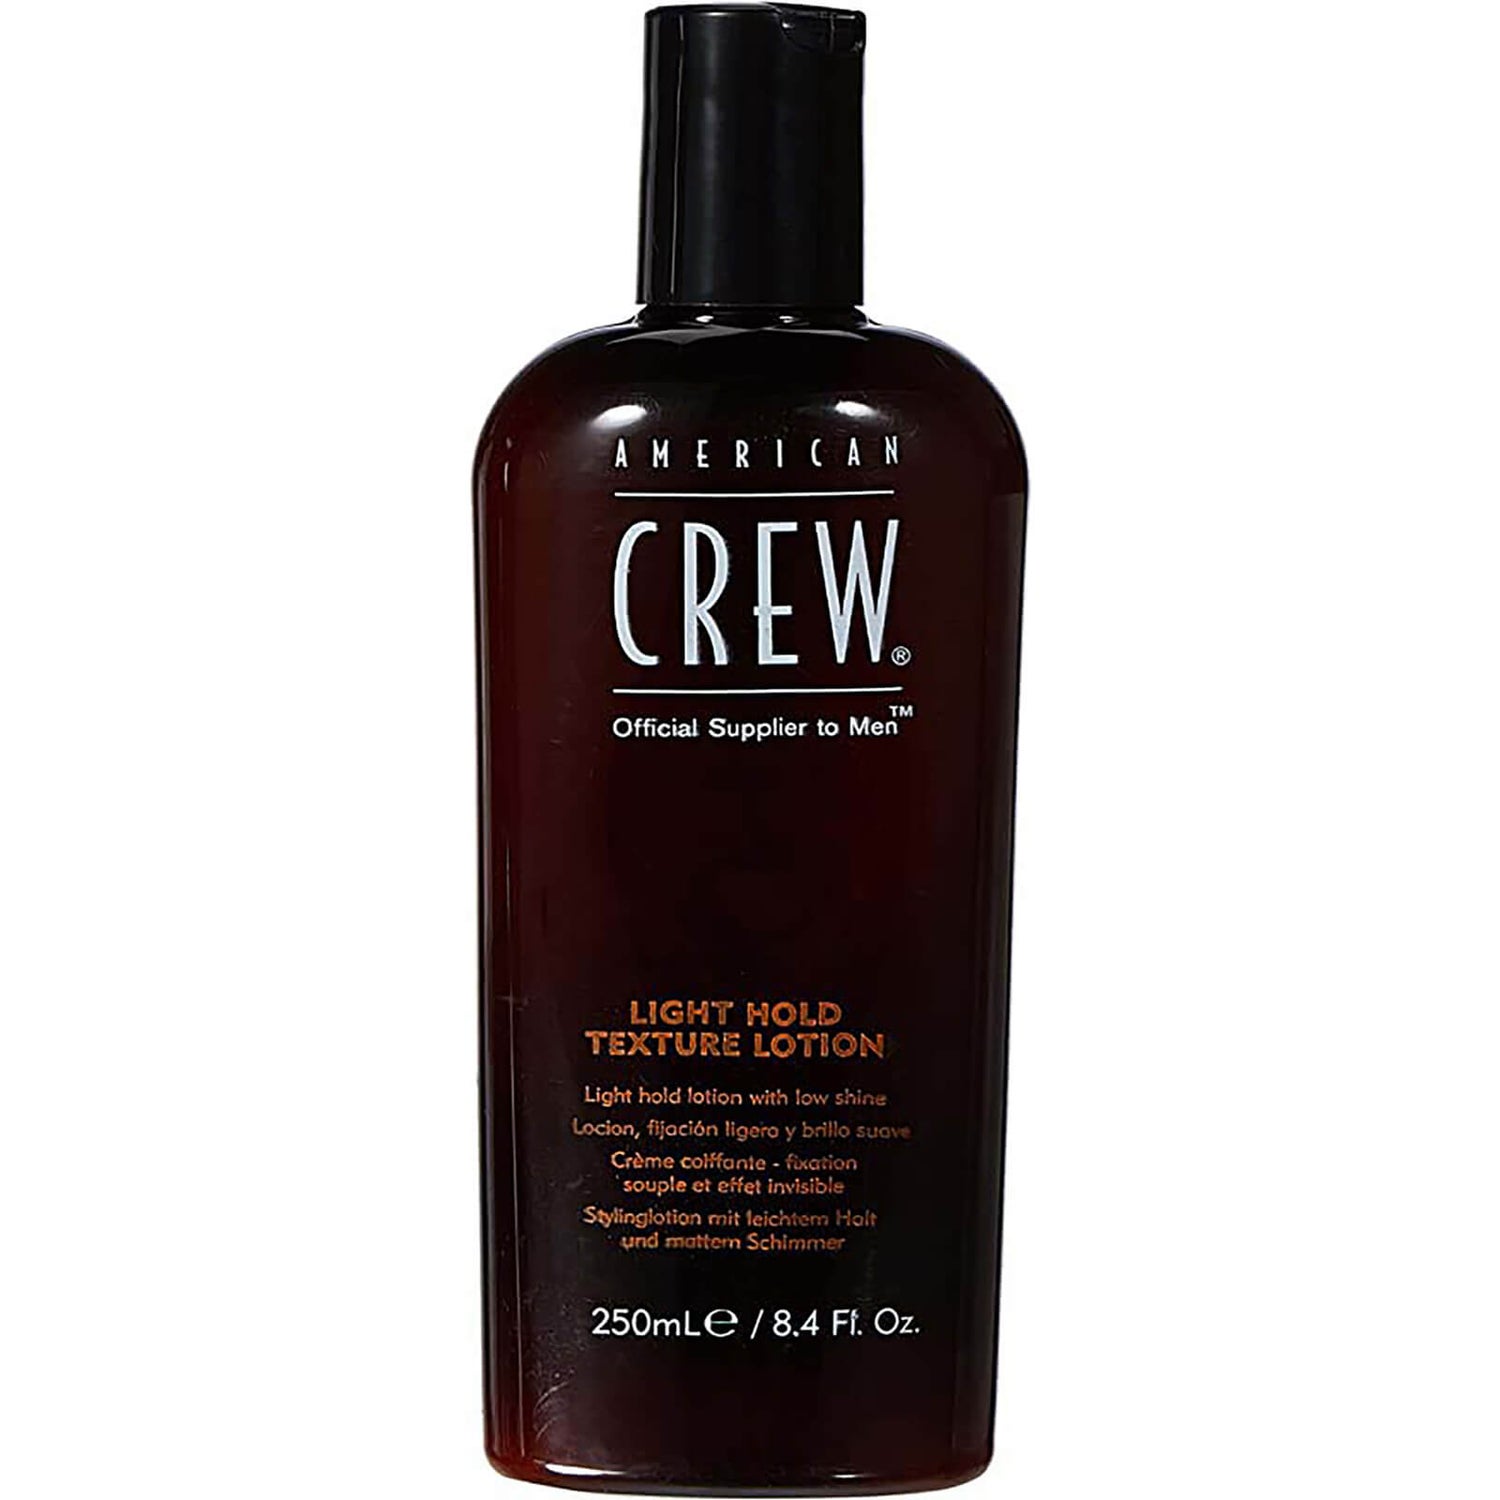 American Crew Light Hold Texture Lotion (250 ml)